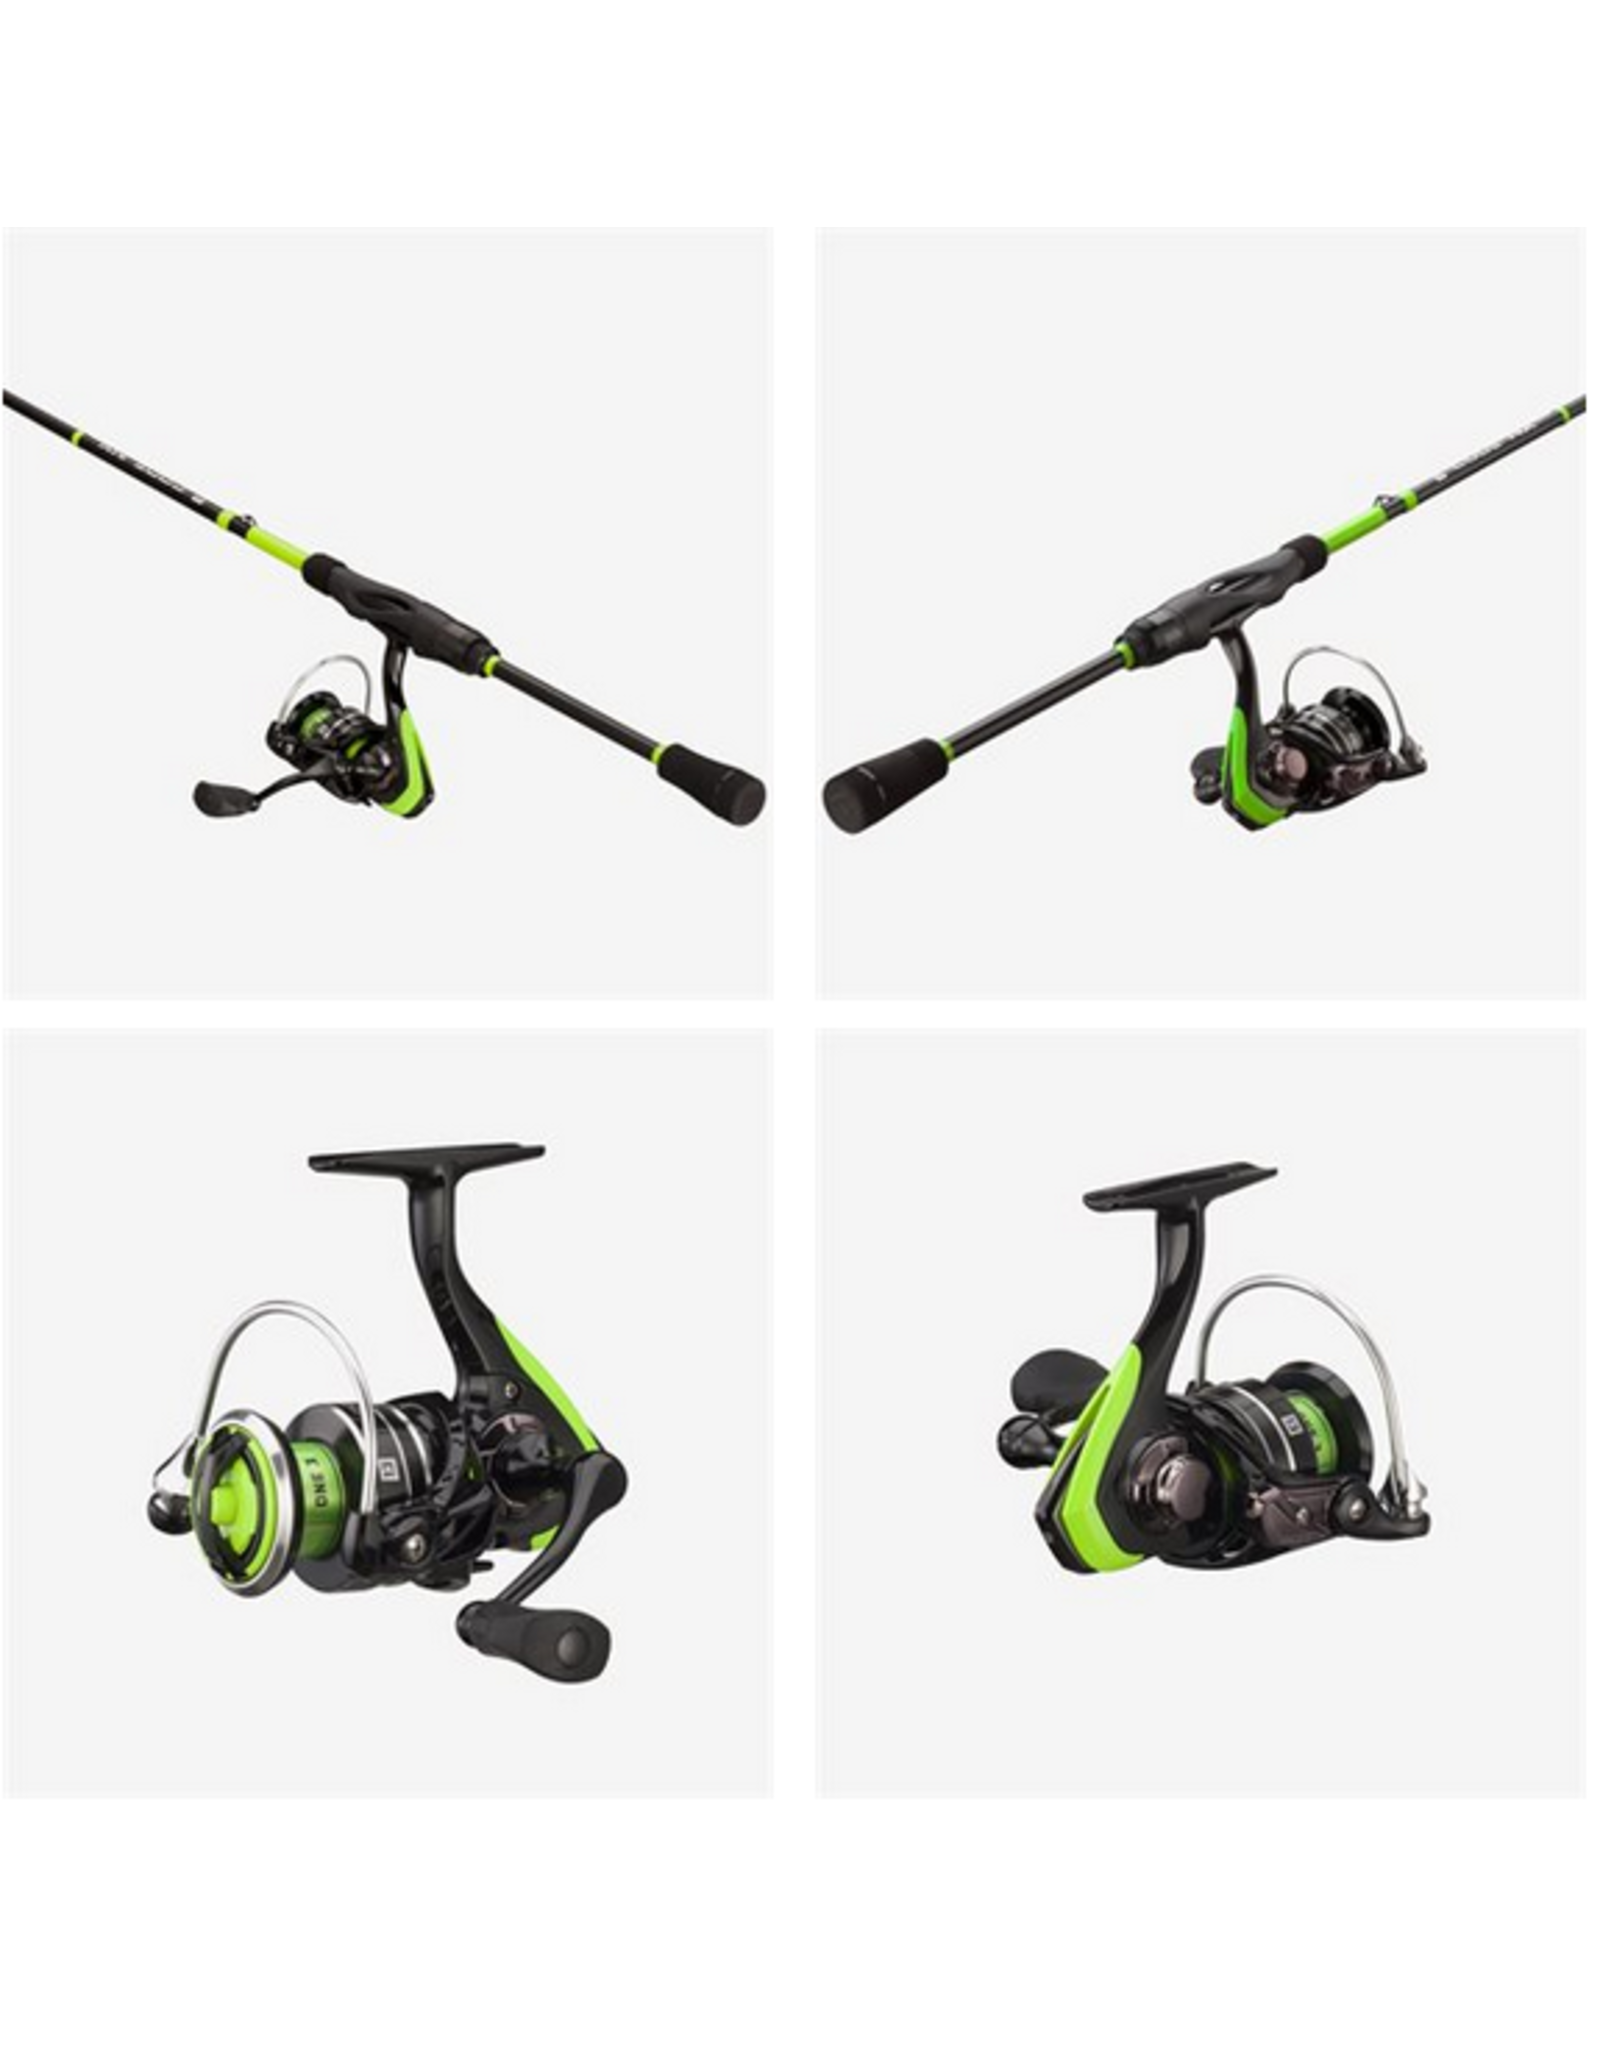 13 Fishing 13 Fishing Code NX - 7'1" M Spinning Combo (3000 Size Reel) (Fast Action) (Fresh) - 2 Piece